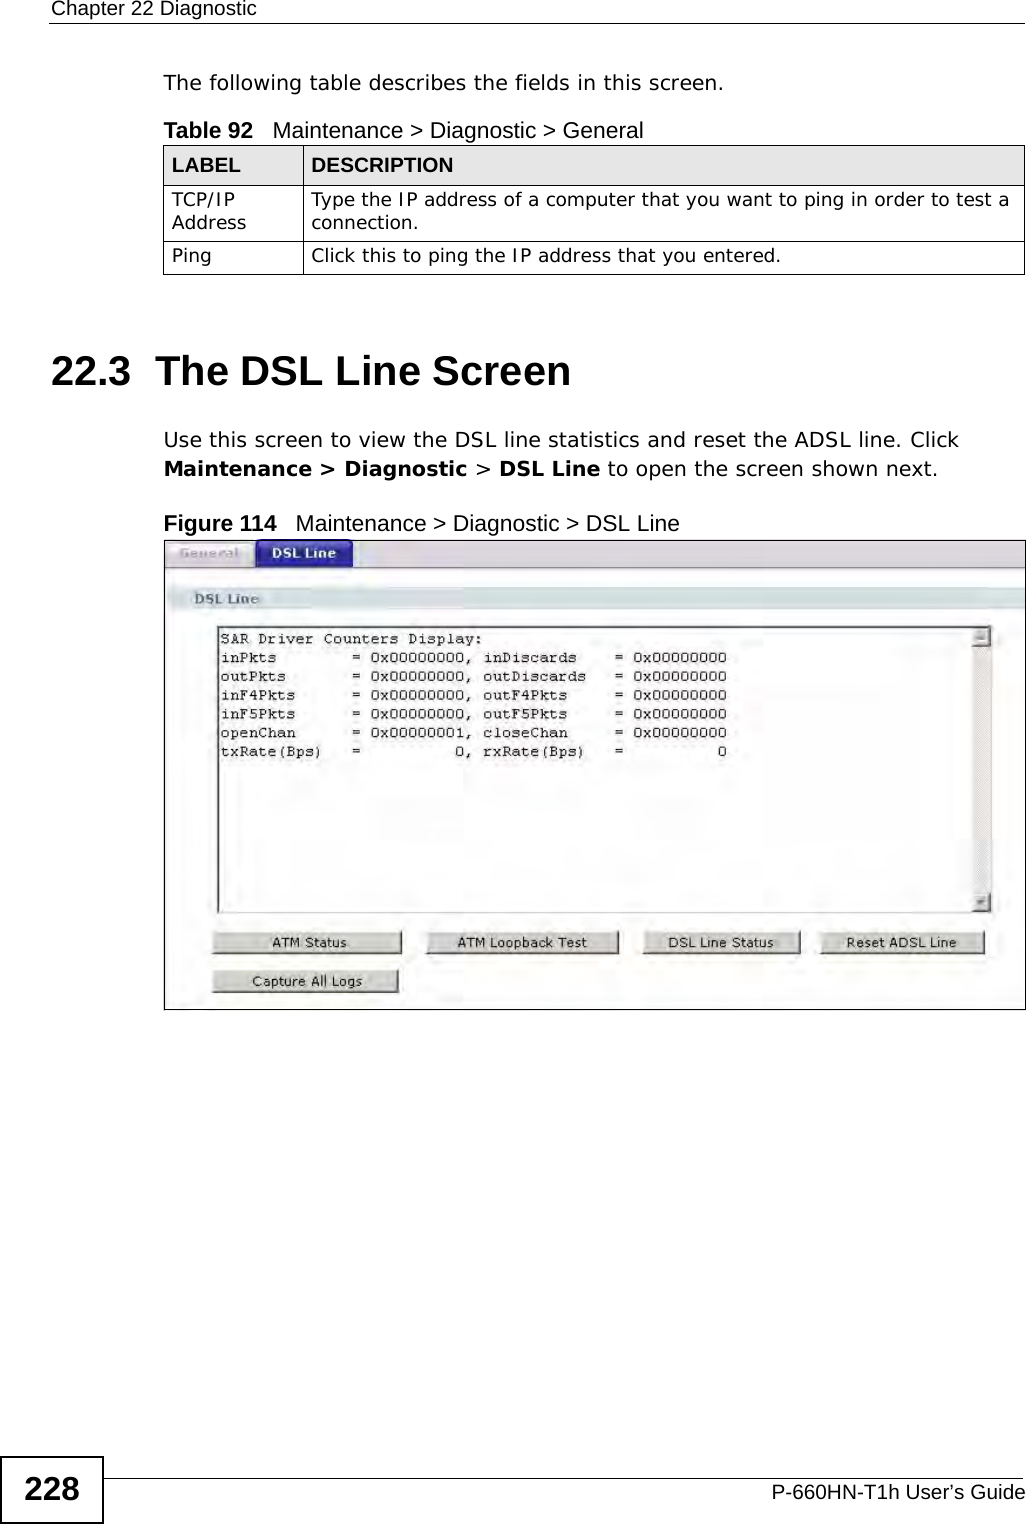 Chapter 22 DiagnosticP-660HN-T1h User’s Guide228The following table describes the fields in this screen. 22.3  The DSL Line Screen Use this screen to view the DSL line statistics and reset the ADSL line. Click Maintenance &gt; Diagnostic &gt; DSL Line to open the screen shown next.Figure 114   Maintenance &gt; Diagnostic &gt; DSL LineTable 92   Maintenance &gt; Diagnostic &gt; GeneralLABEL DESCRIPTIONTCP/IP Address Type the IP address of a computer that you want to ping in order to test a connection.Ping Click this to ping the IP address that you entered.